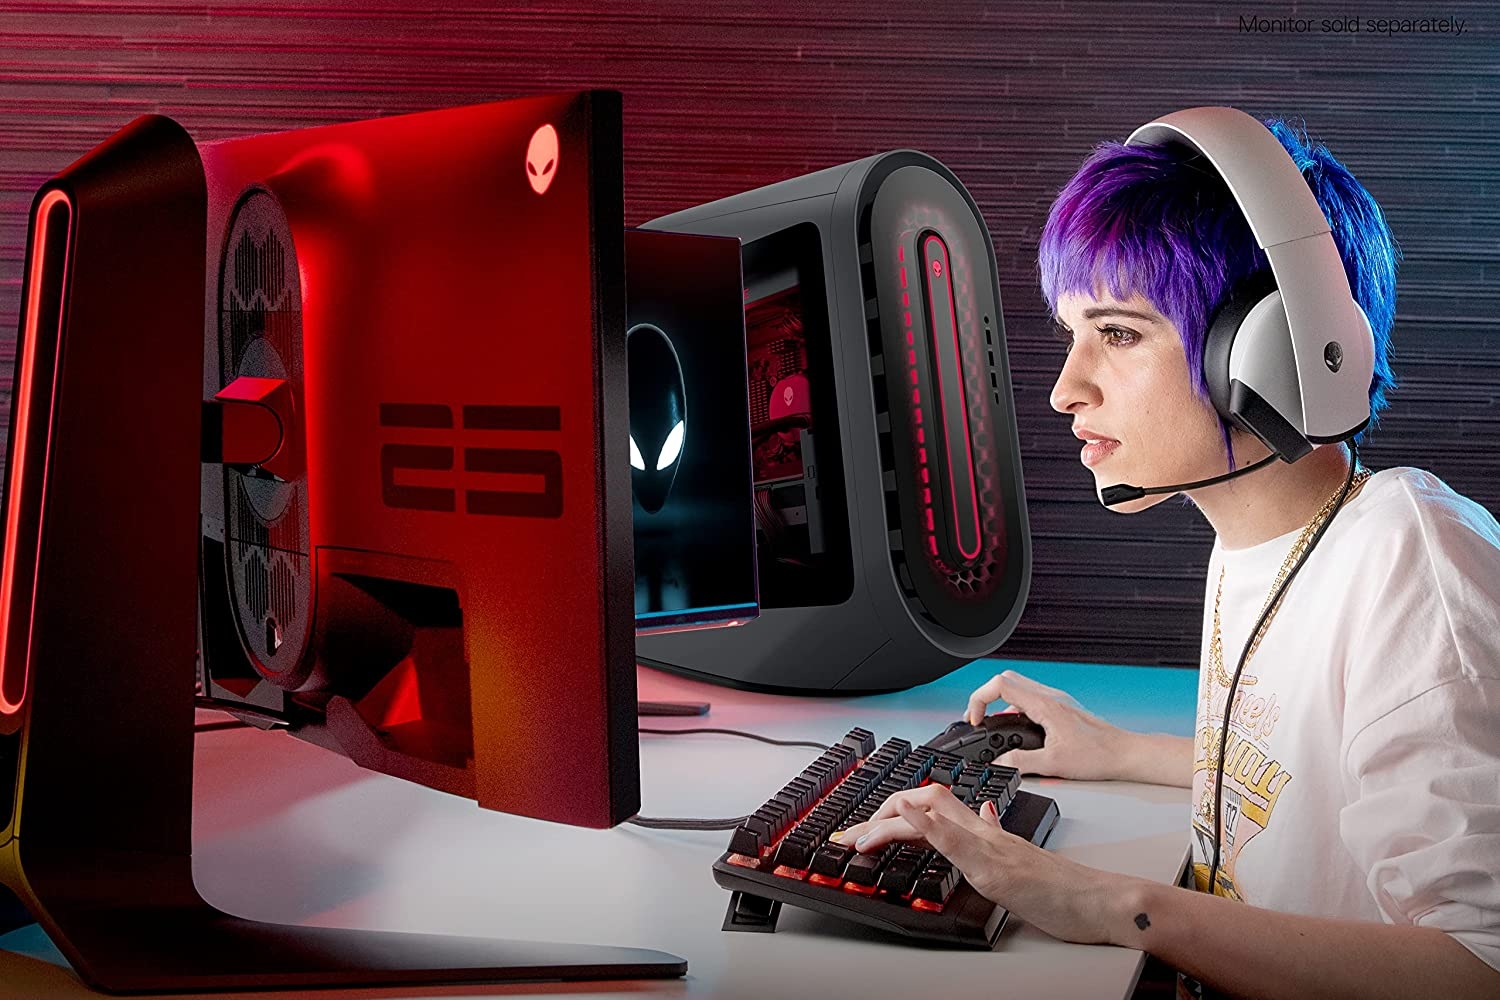 alienware aurora r14 amd ryzen gaming pc being used by a girl with purple hair